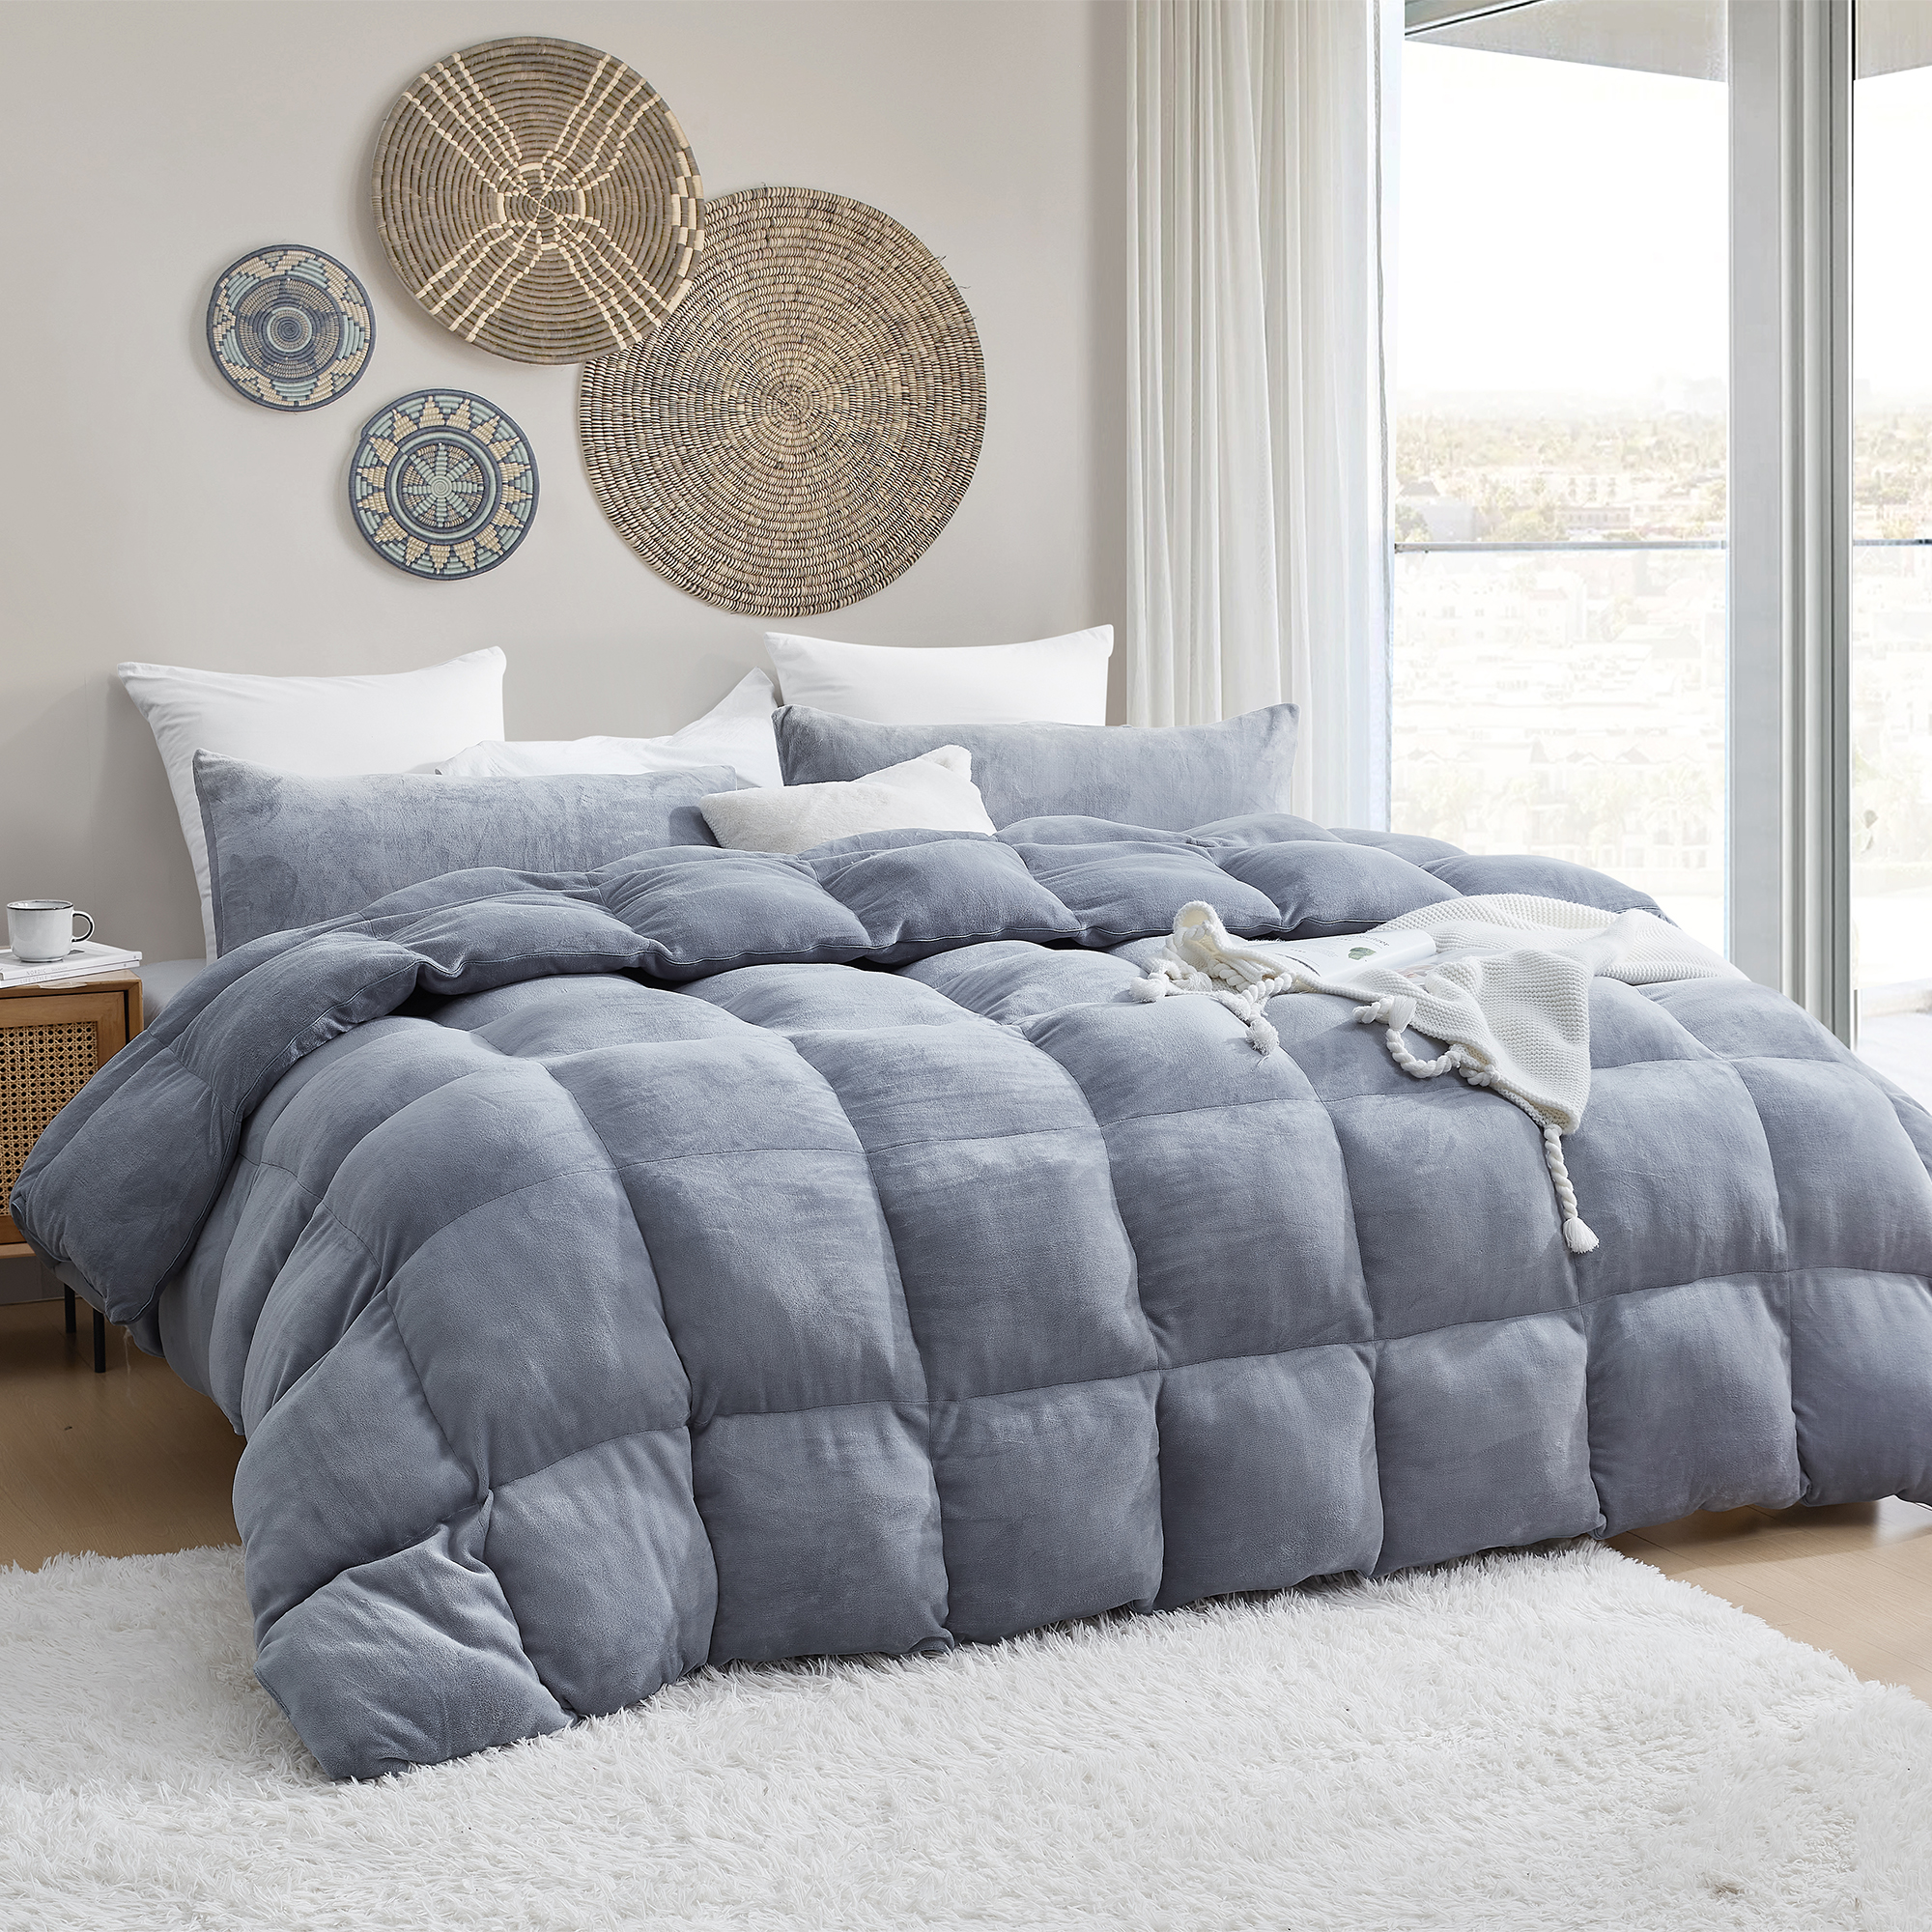 Dam Boi He Thick - Coma Inducer Oversized Comforter - Silver Gray